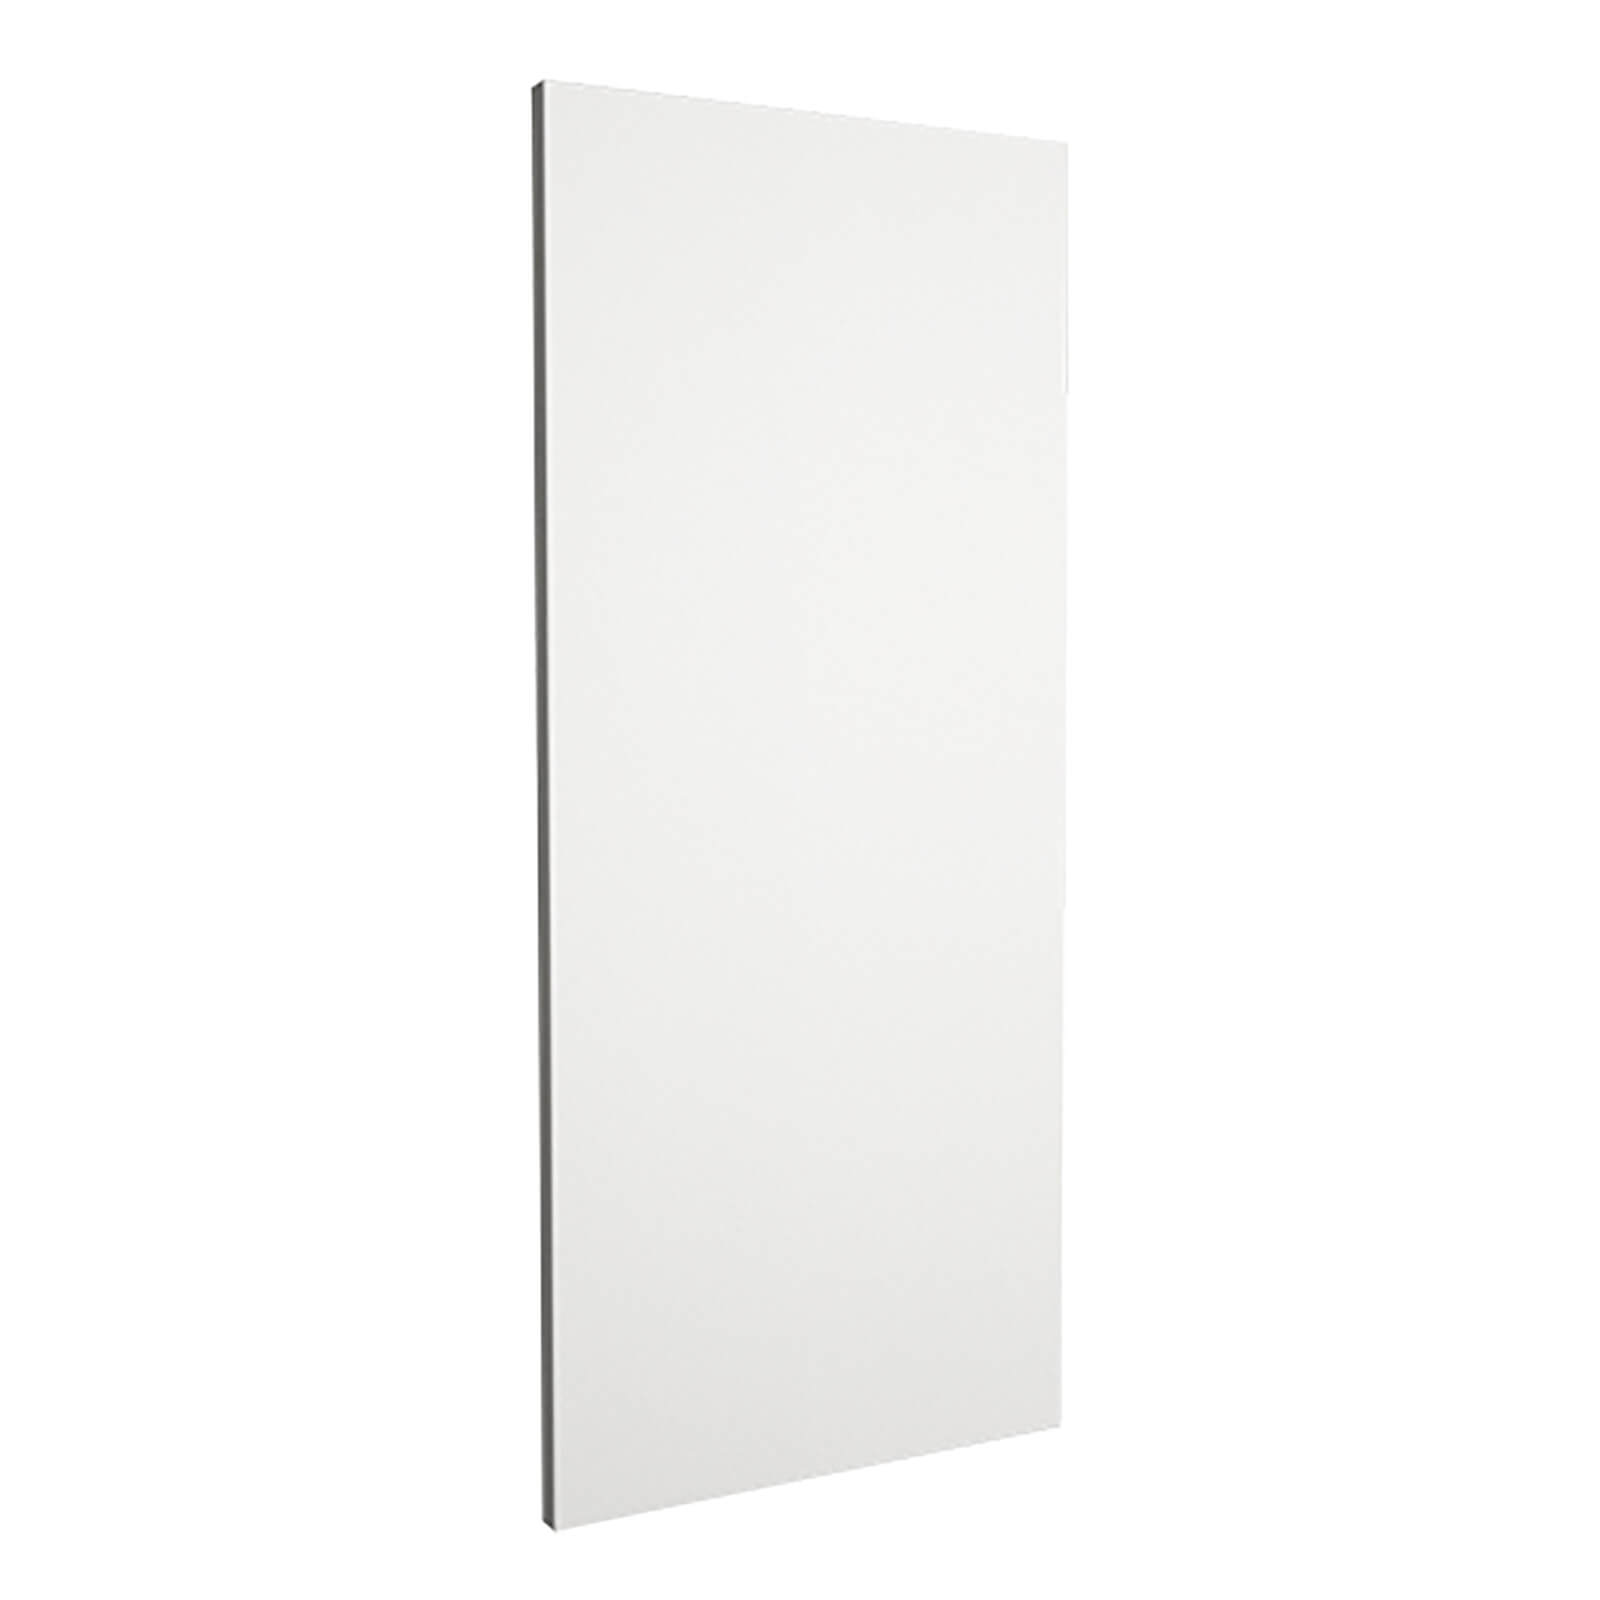 Wall Replacement End Panels - Pair for High Gloss Slab White, Handleless White Gloss or Gloss Slab White